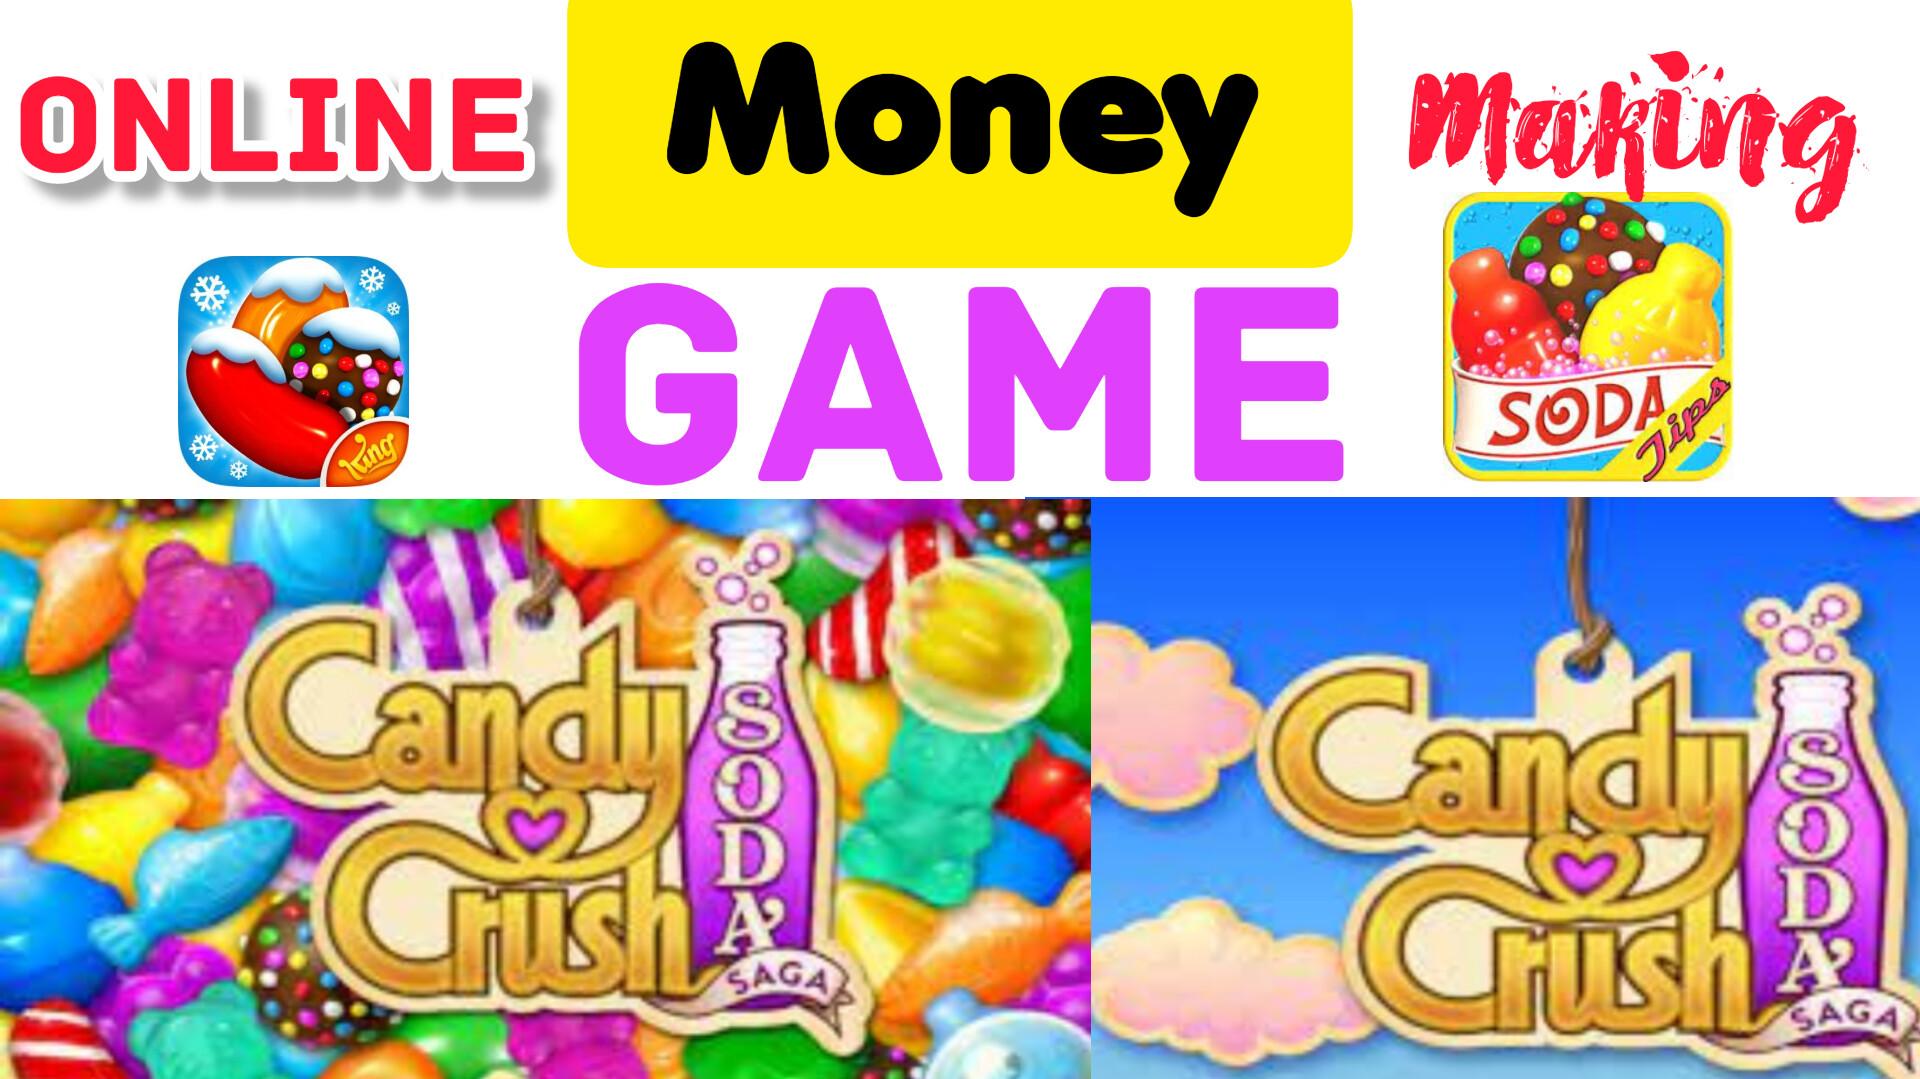 Online Money Making Games | Candy Crush | Play To Earn Games